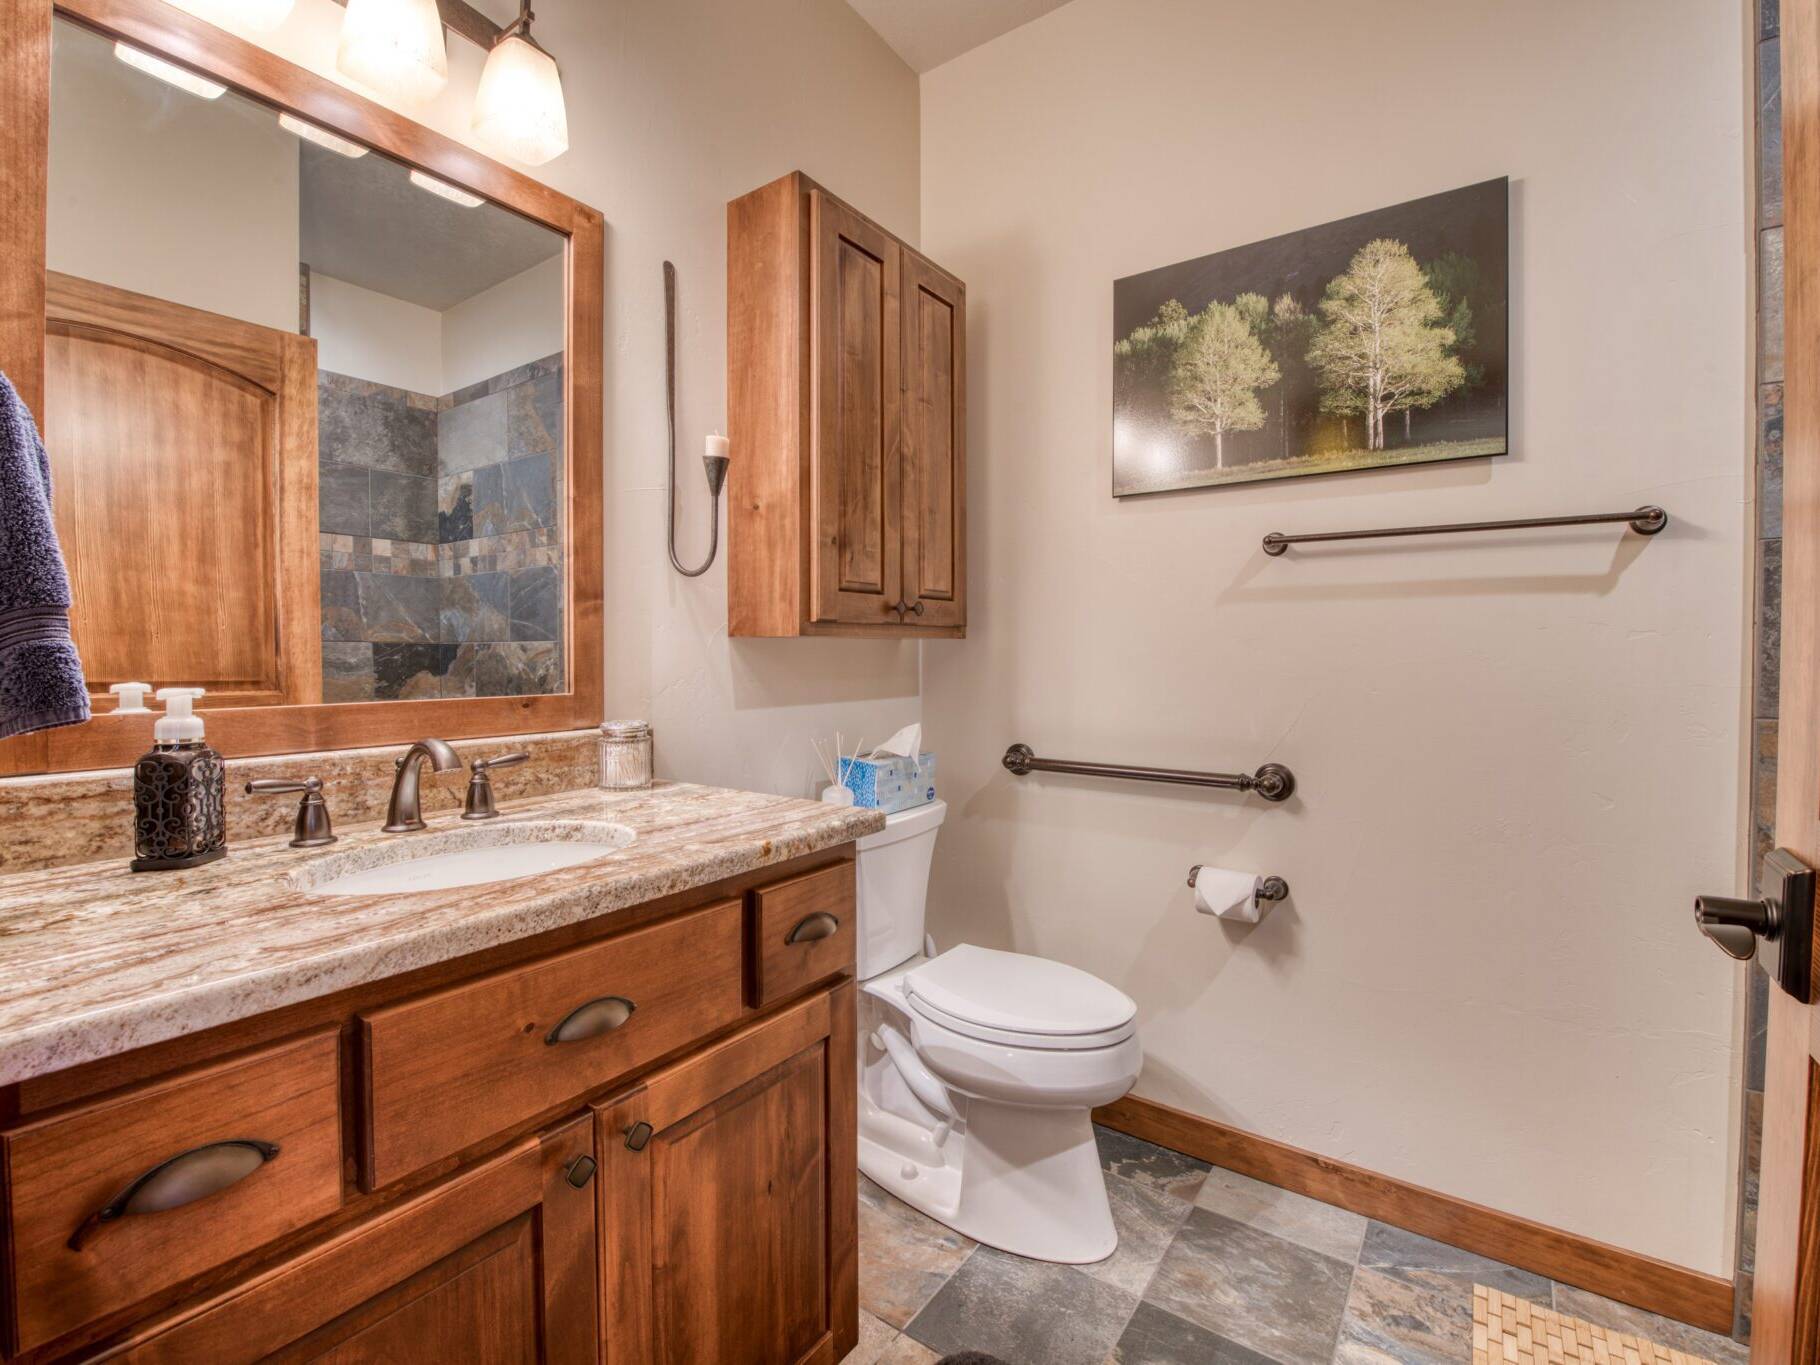 Guest bathroom with tile floors, granite countertops, and wood cabinetry & trim in a custom home near Hamilton, MT